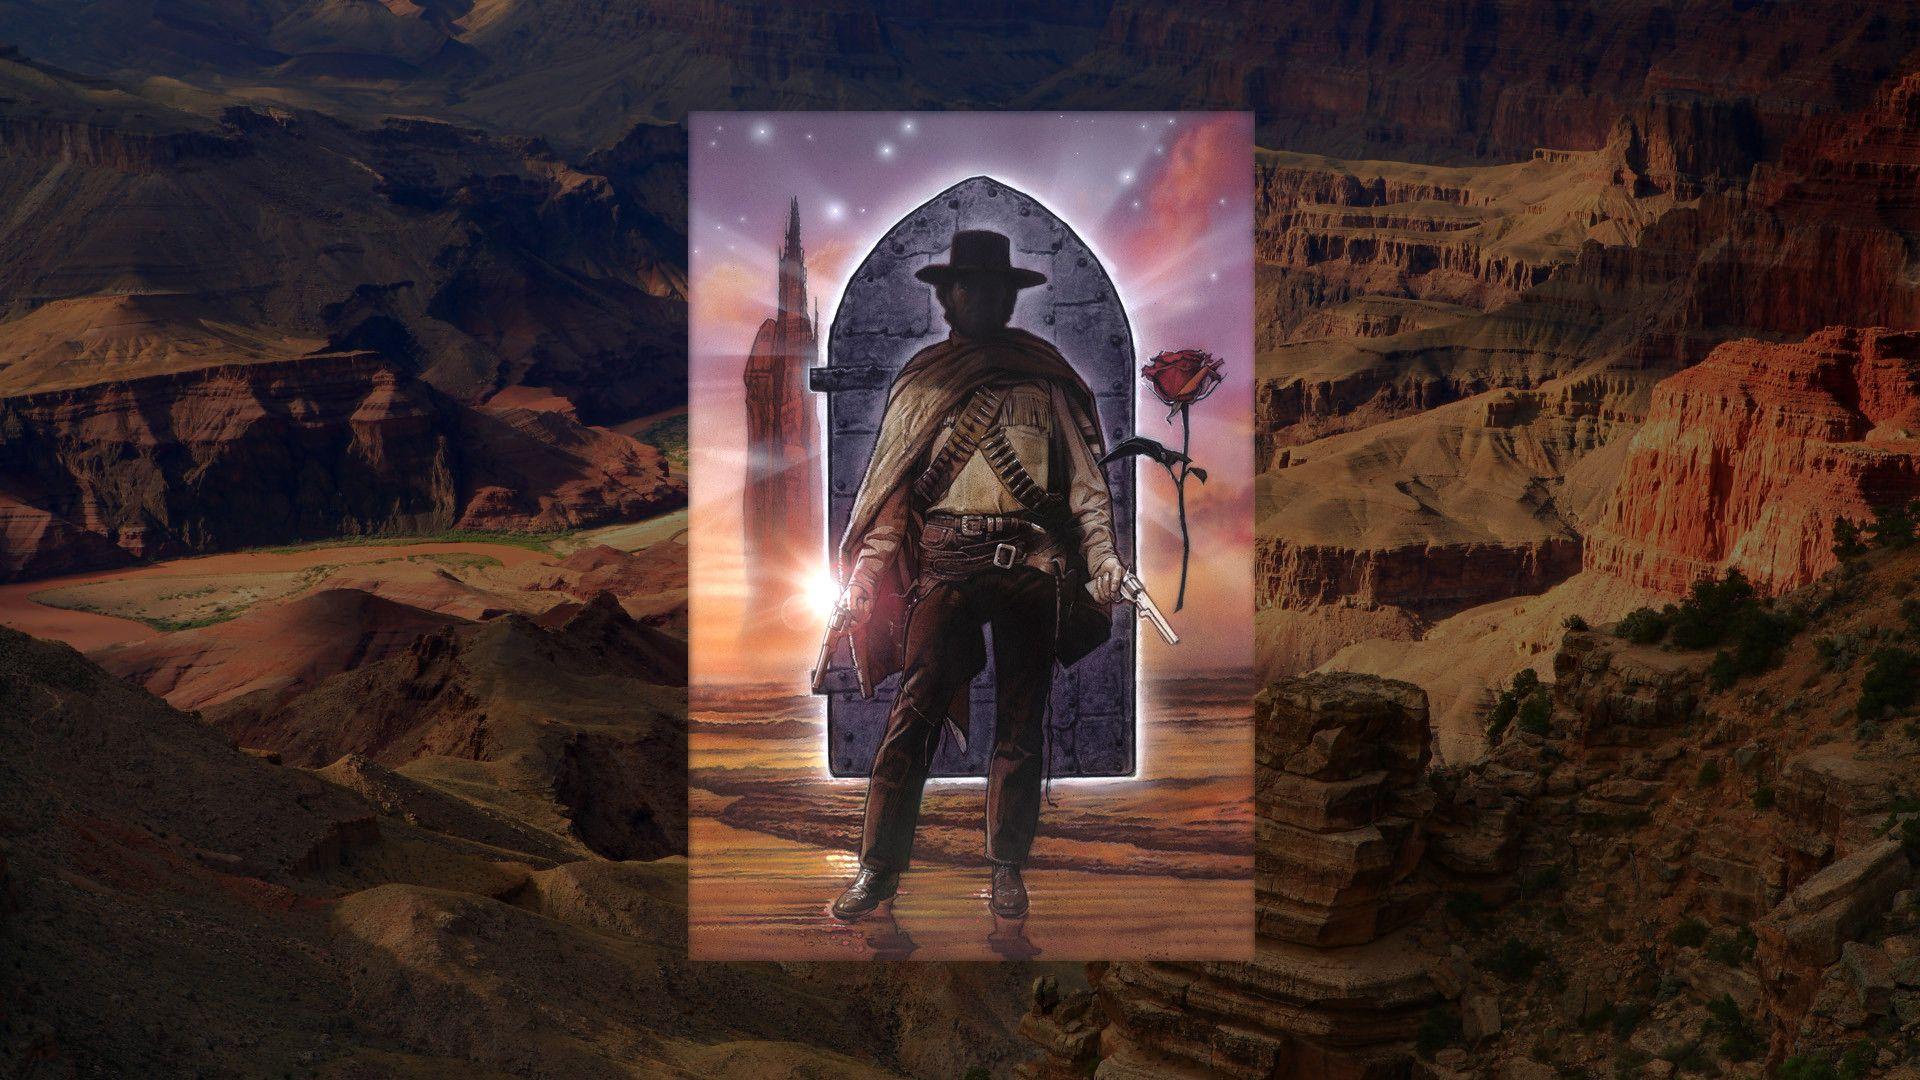 download The Dark Tower free